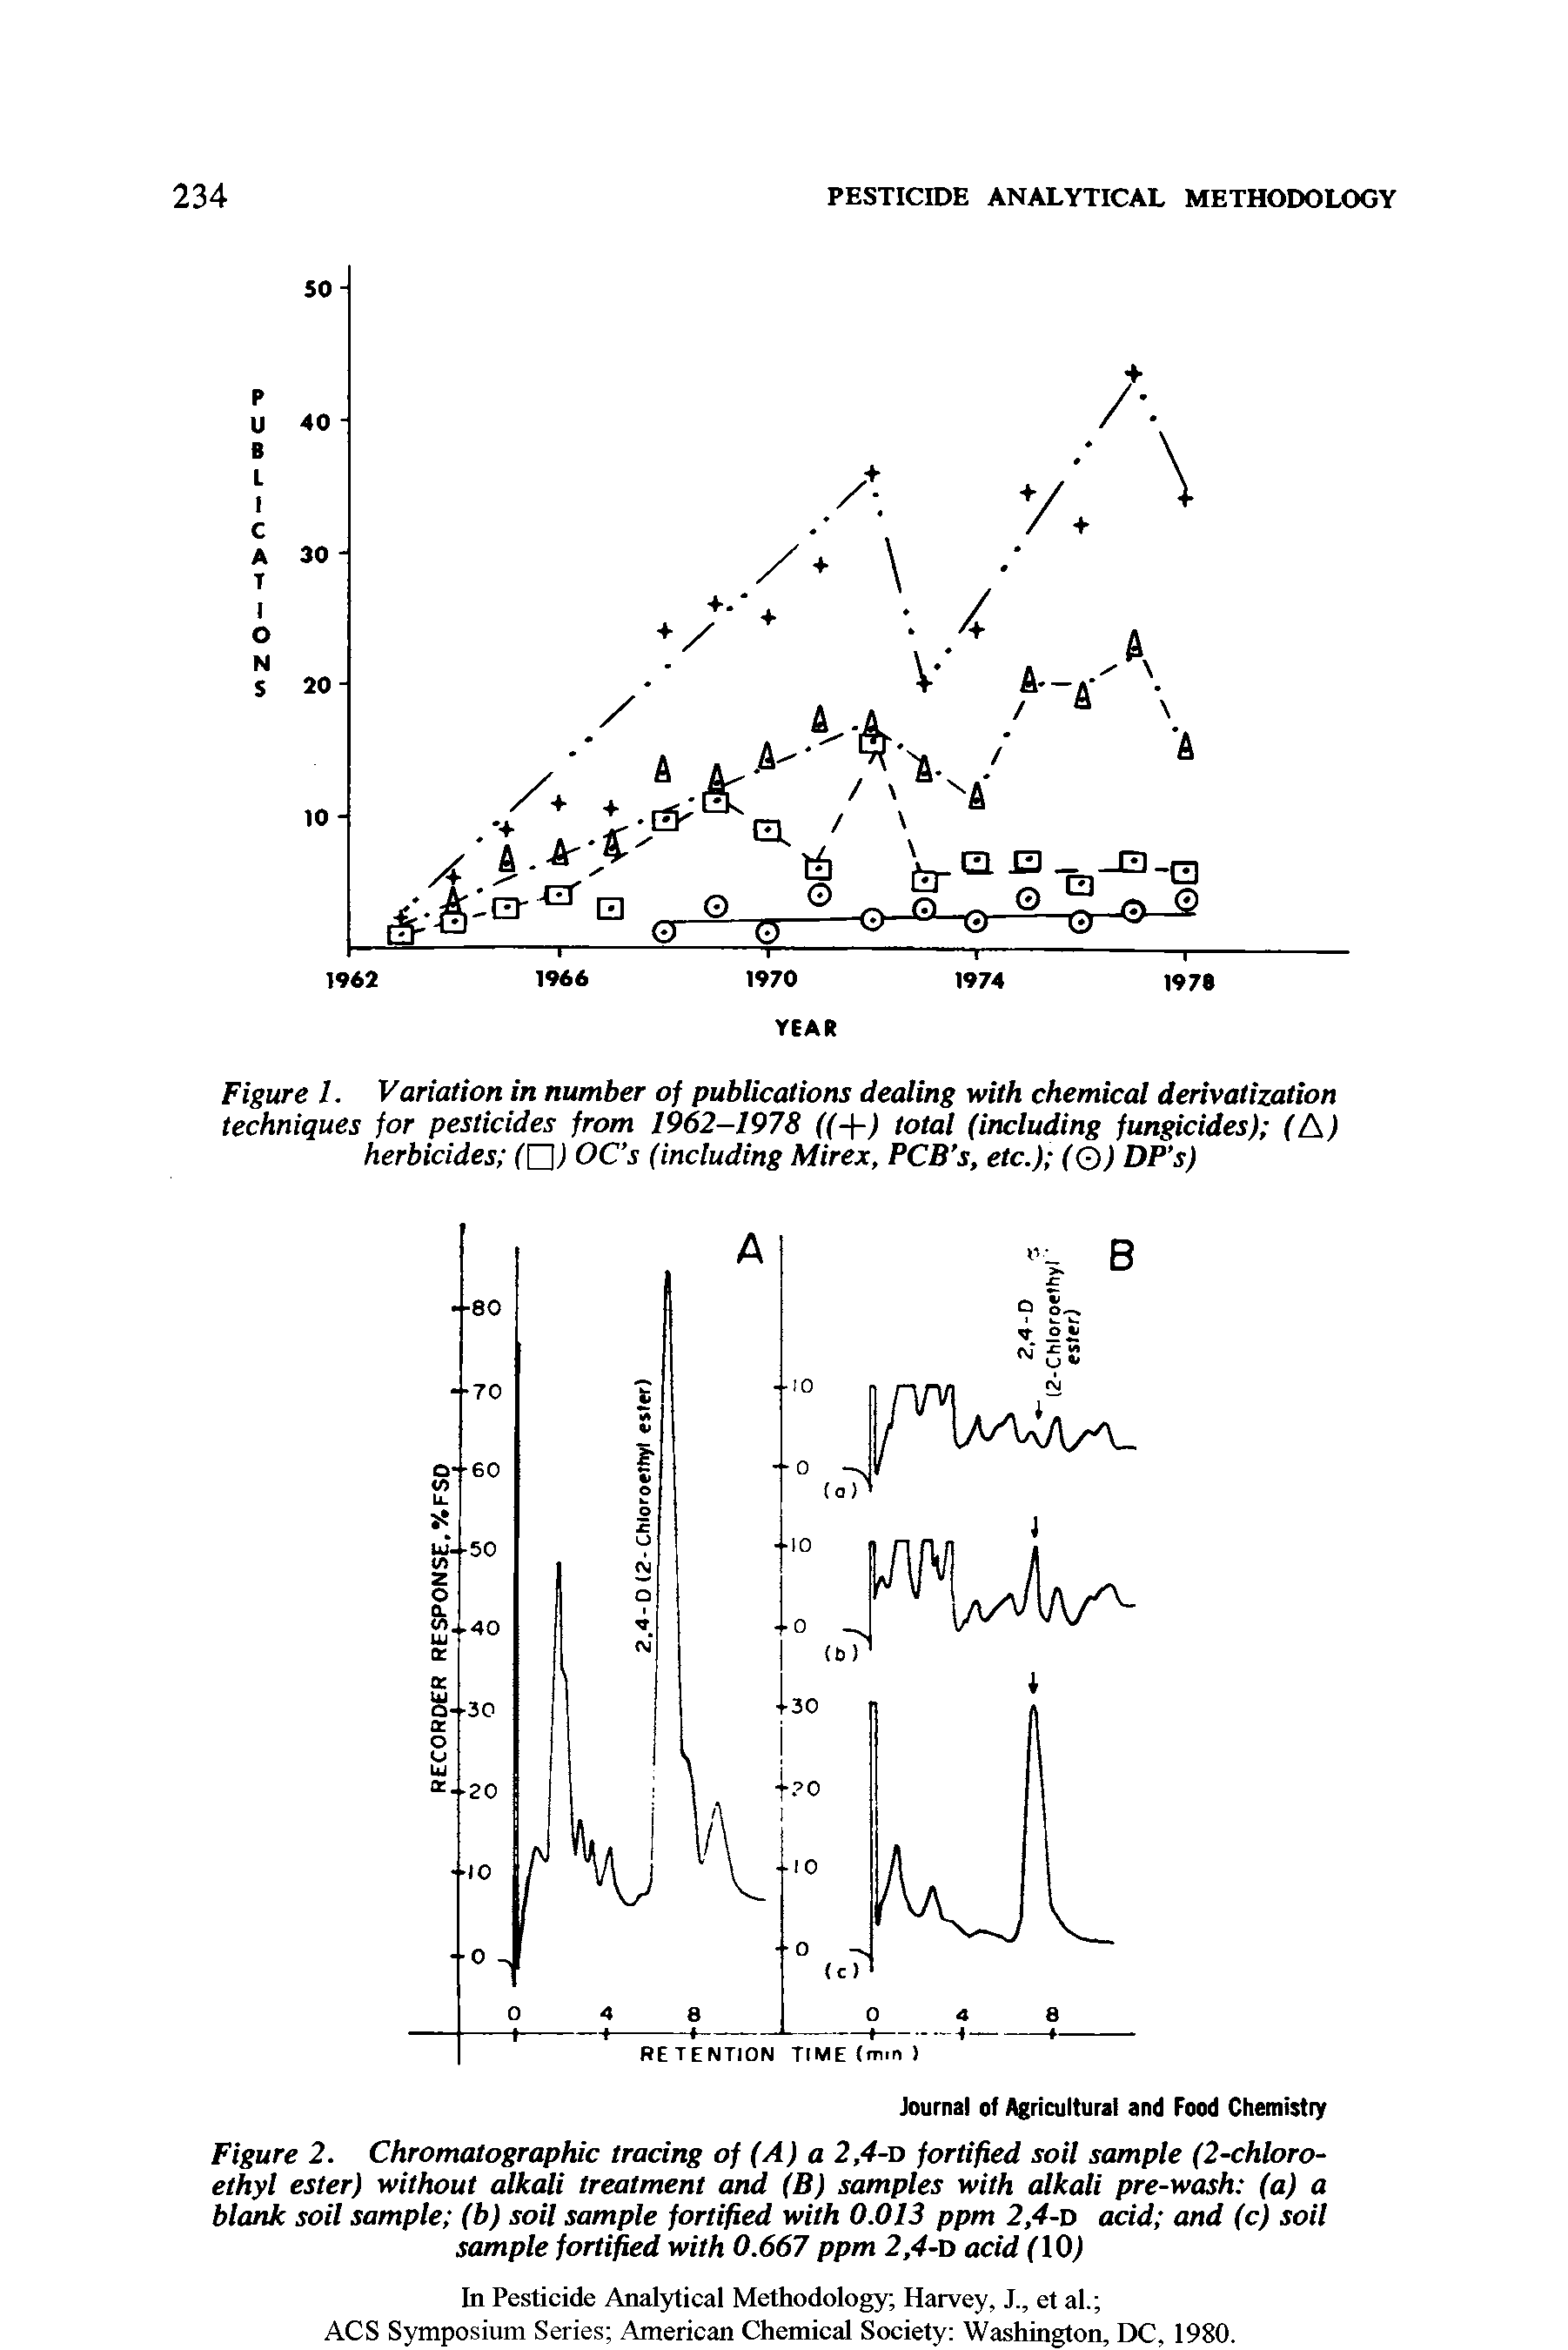 Figure 1. Variation in number of publications dealing with chemical derivatization techniques for pesticides from 1962-1978 ((-)-) total (including fungicides) (A) herbicides (O OC s (including Mirex, PCB s, etc.) (Q) DP s)...